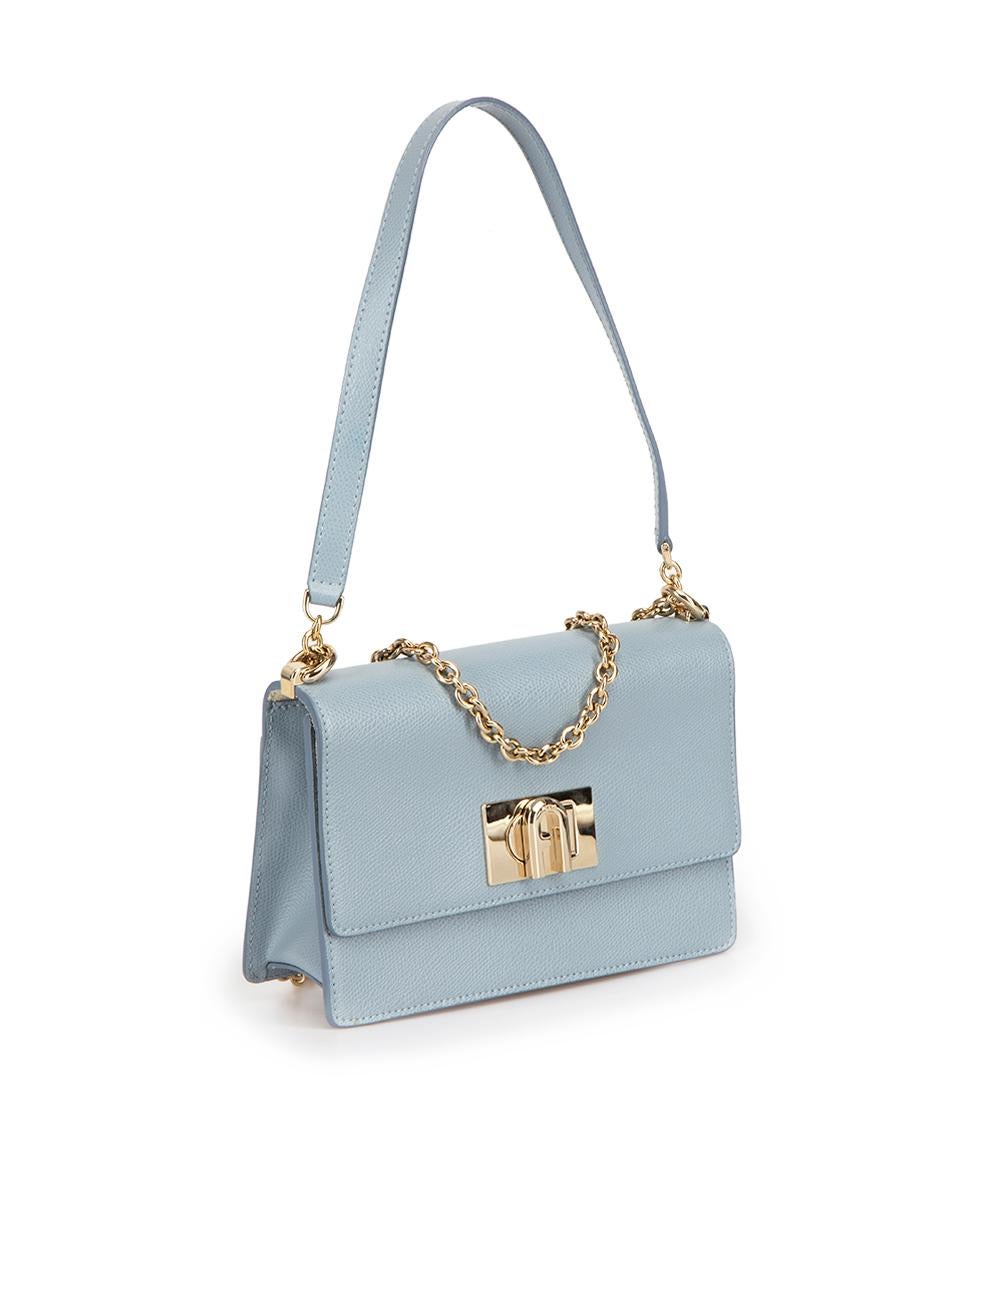 CONDITION is Very good. Minimal wear to bag is evident. Minimal wear to the rear of the bag with discoloured marks on this used Furla designer resale item.



Details


Light blue

Leather

Mini crossbody bag

Gold tone hardware

Leather and chain